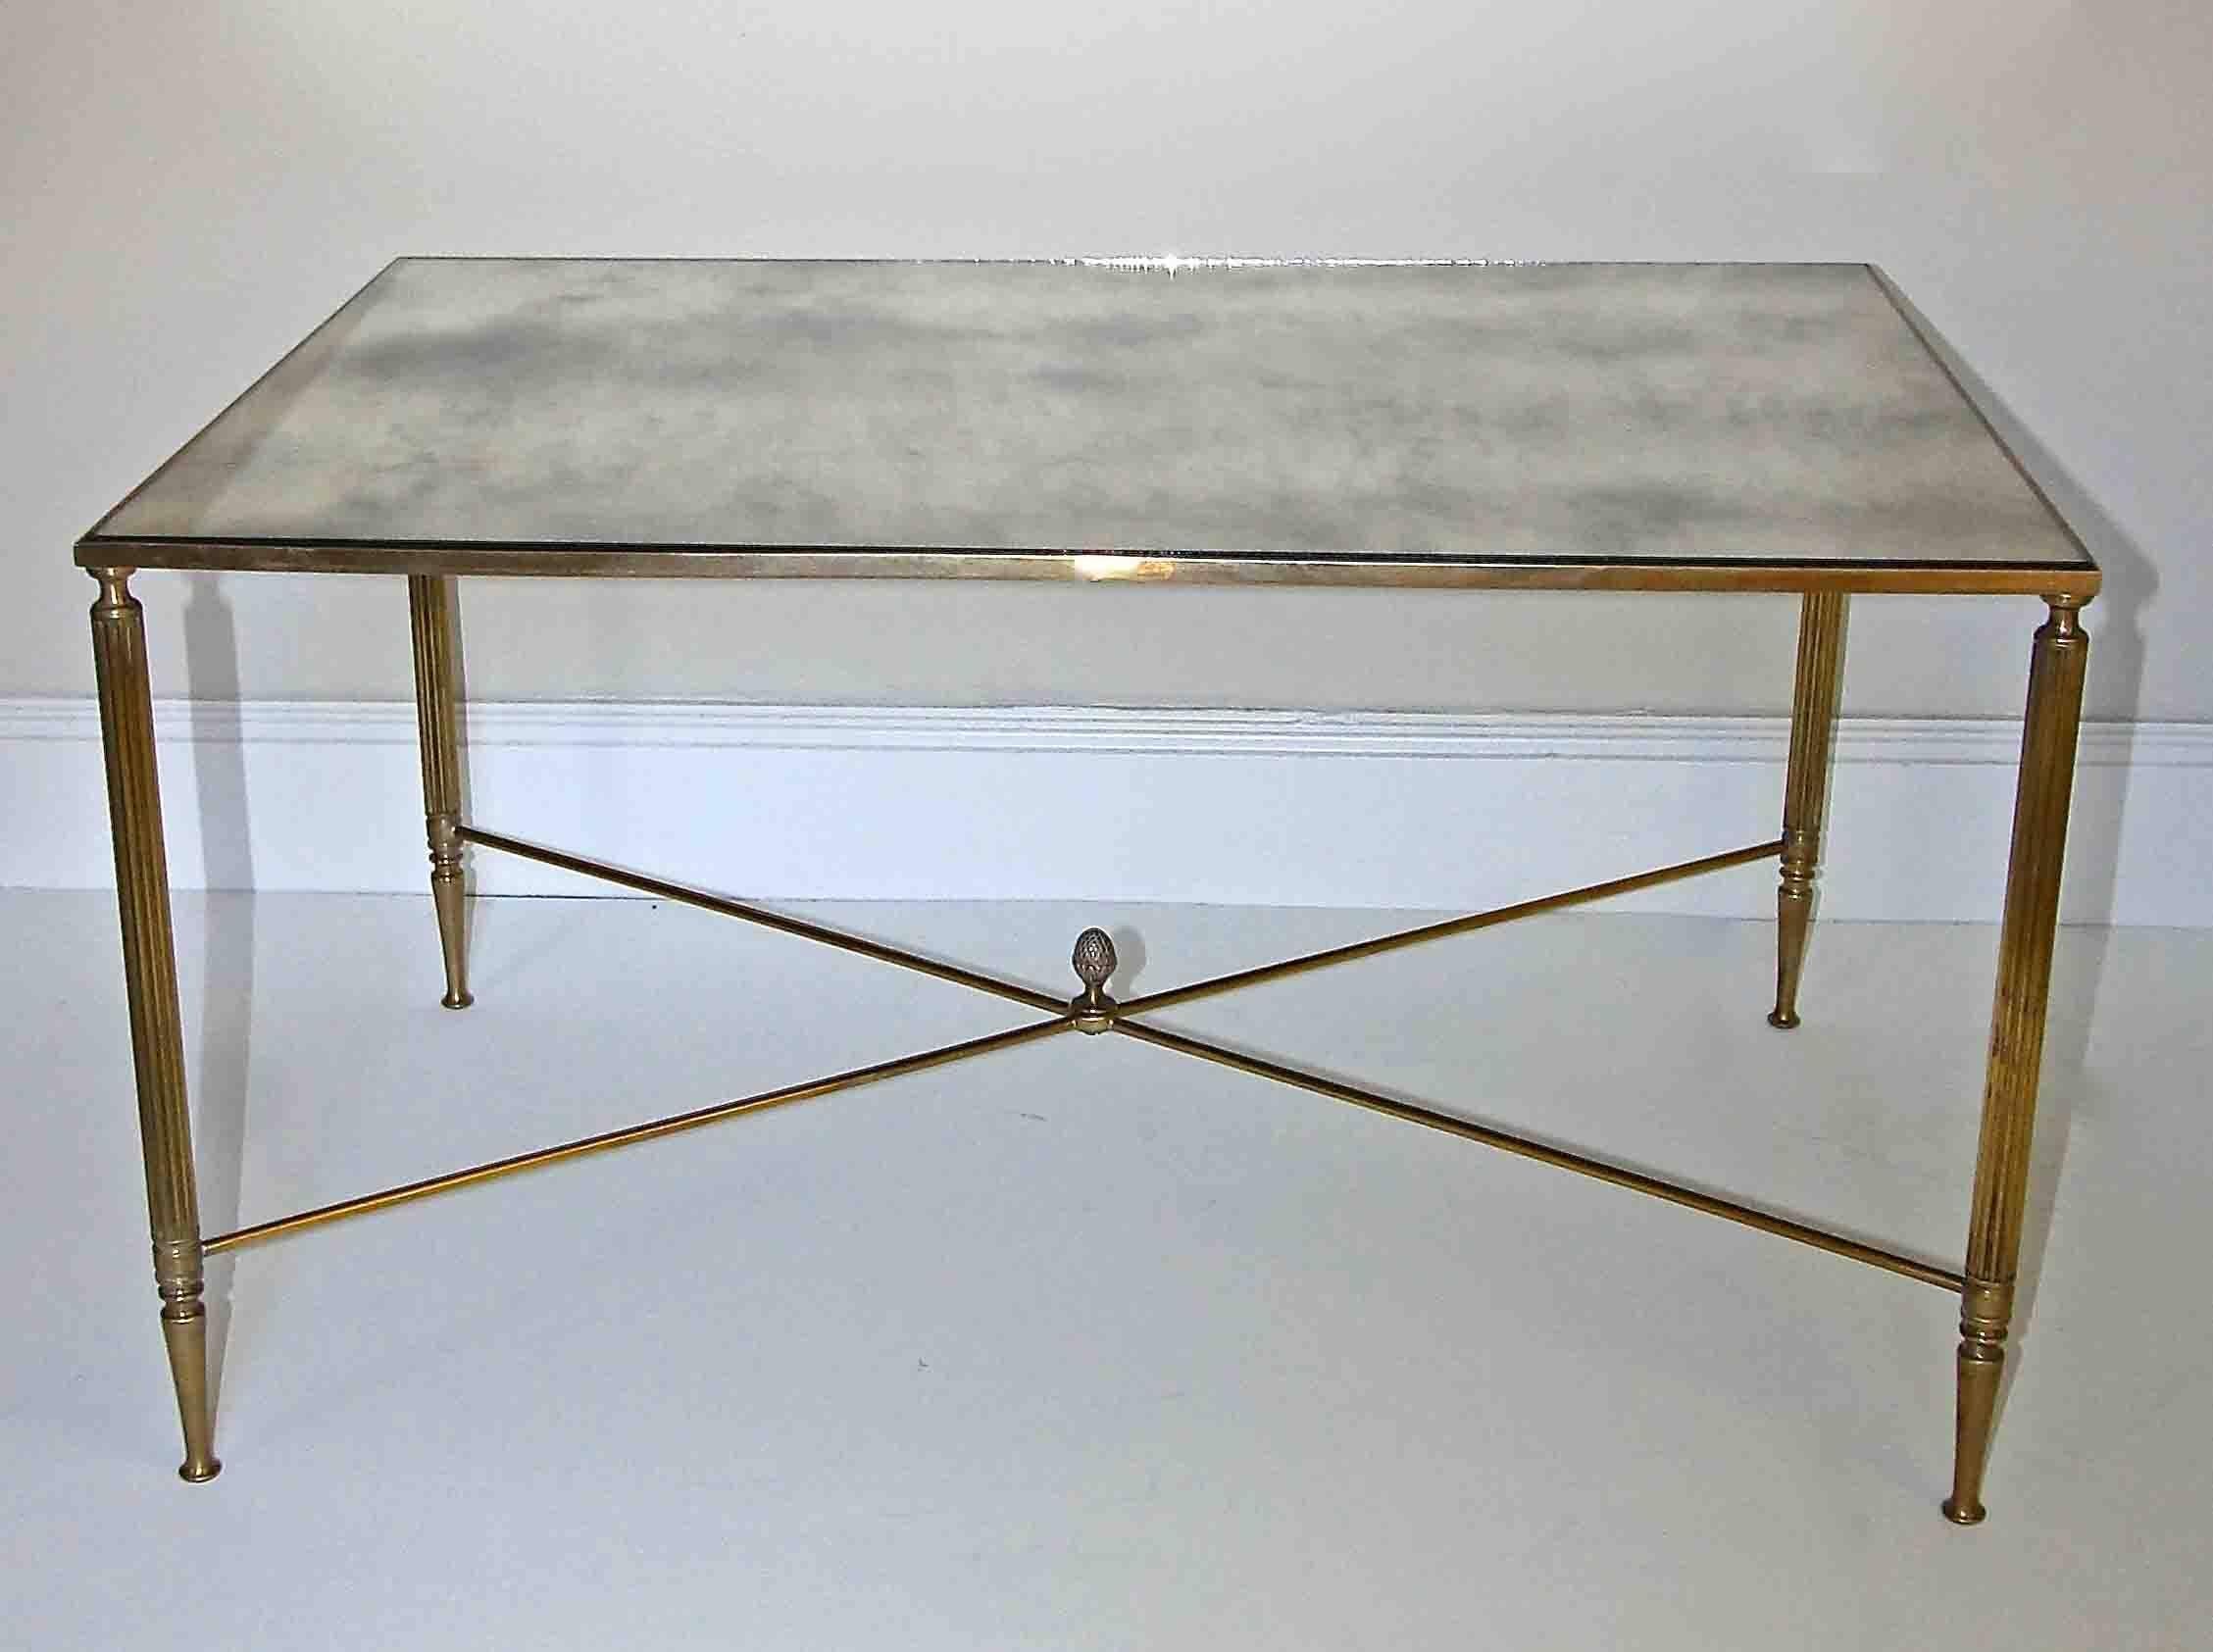 French brass X base coffee or cocktail table with inset antiqued mirror top. Nicely detailed with reeded legs, X stretcher and acorn center finial.